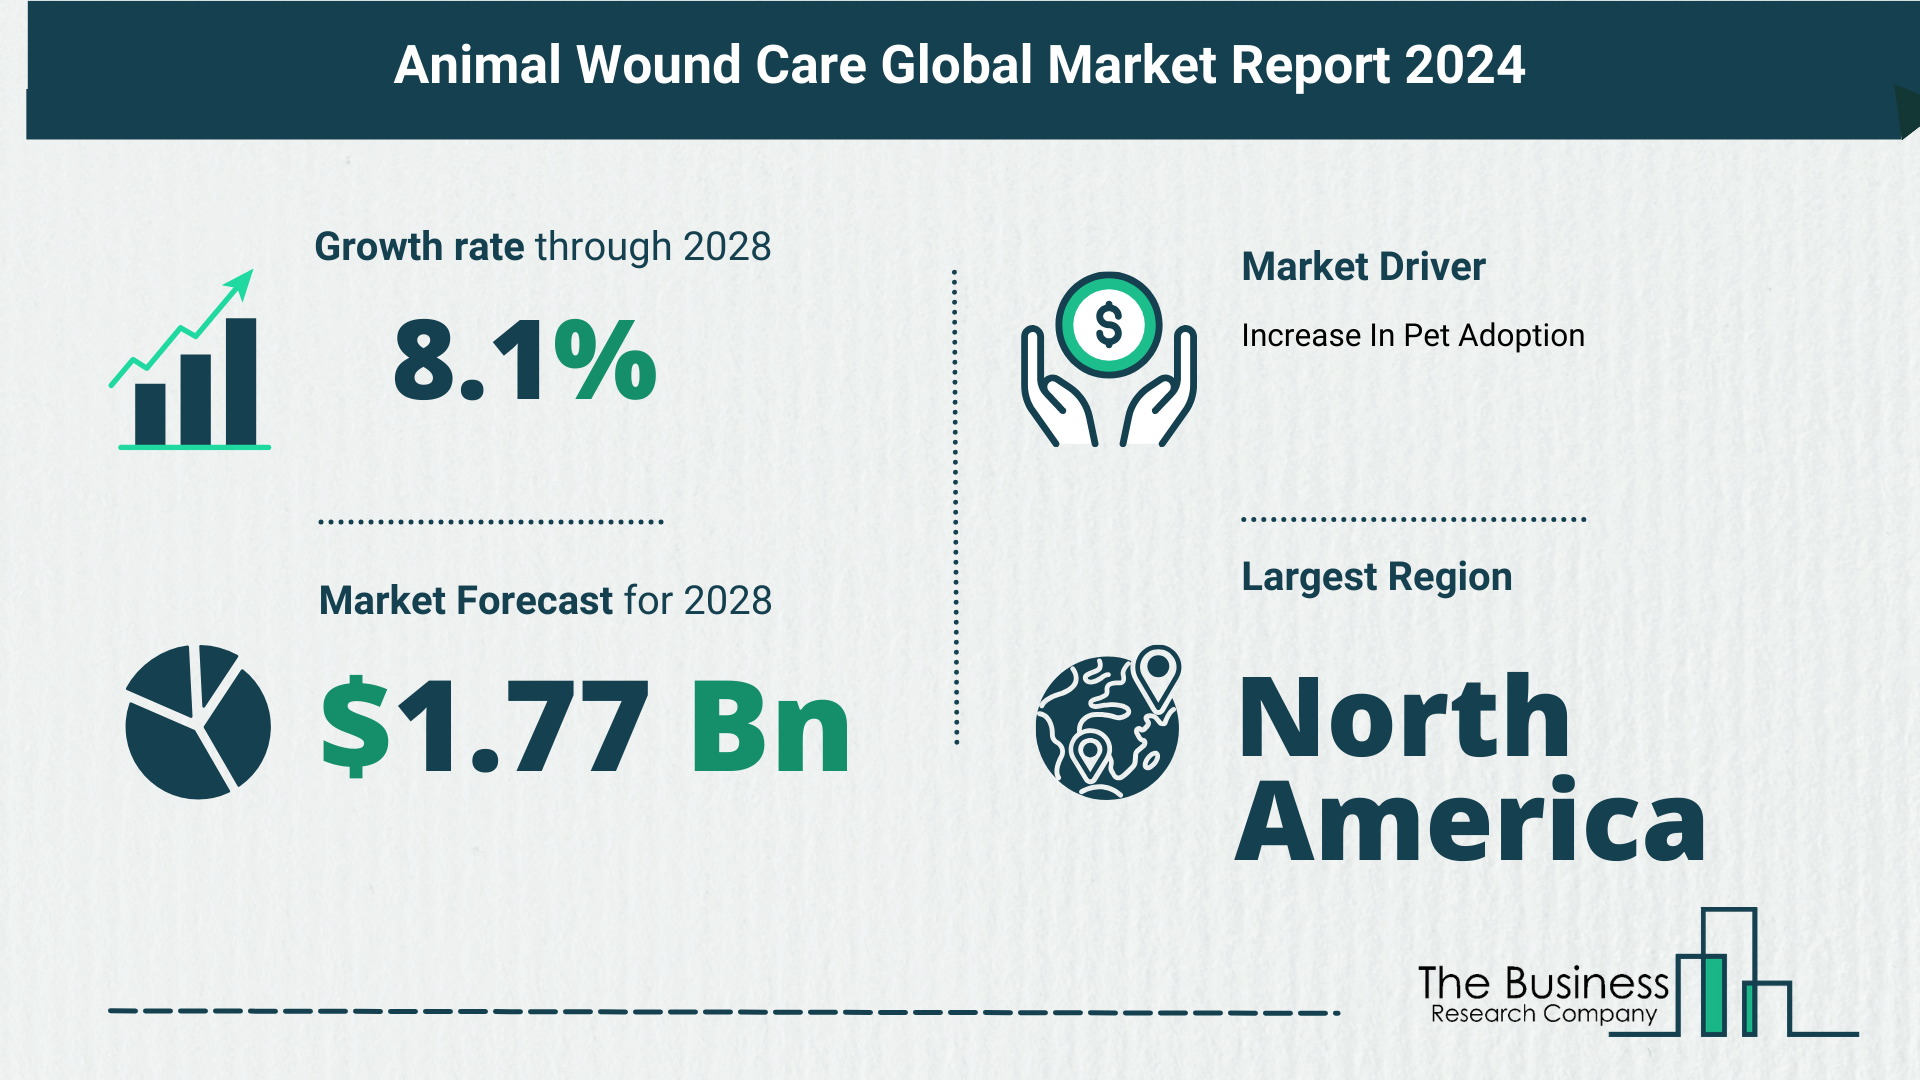 Top 5 Insights From The Animal Wound Care Market Report 2024